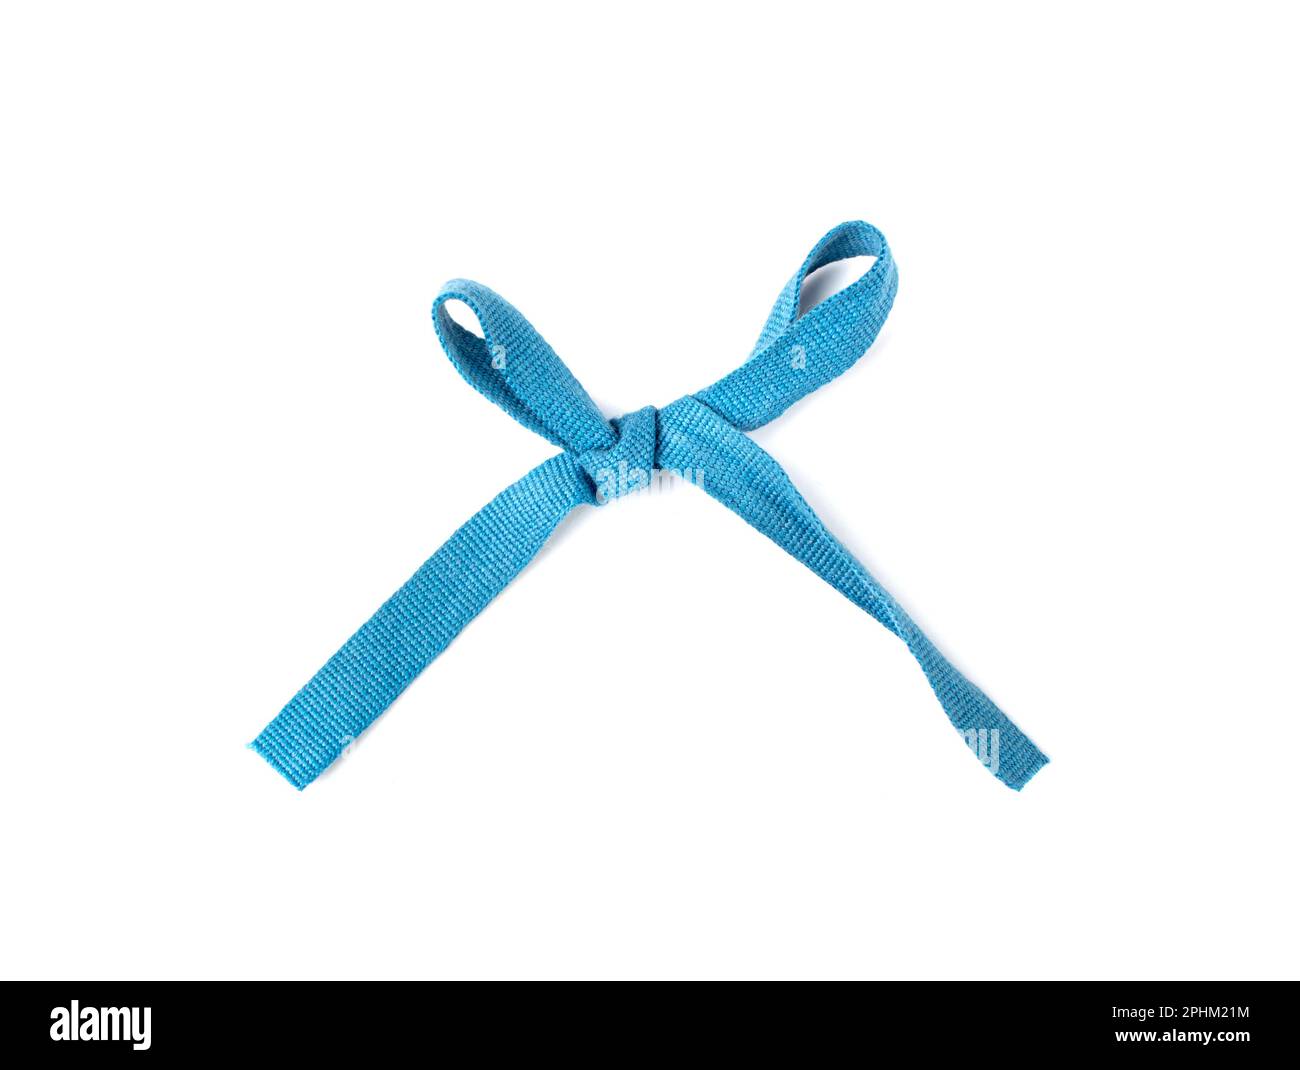 Braid Bow Isolated, Cotton Rope Bows, Blue Packaging Cord Knots, Knotted Rustic Gift, Eco-Friendly Natural Blue Rope Bow on White Background Stock Photo